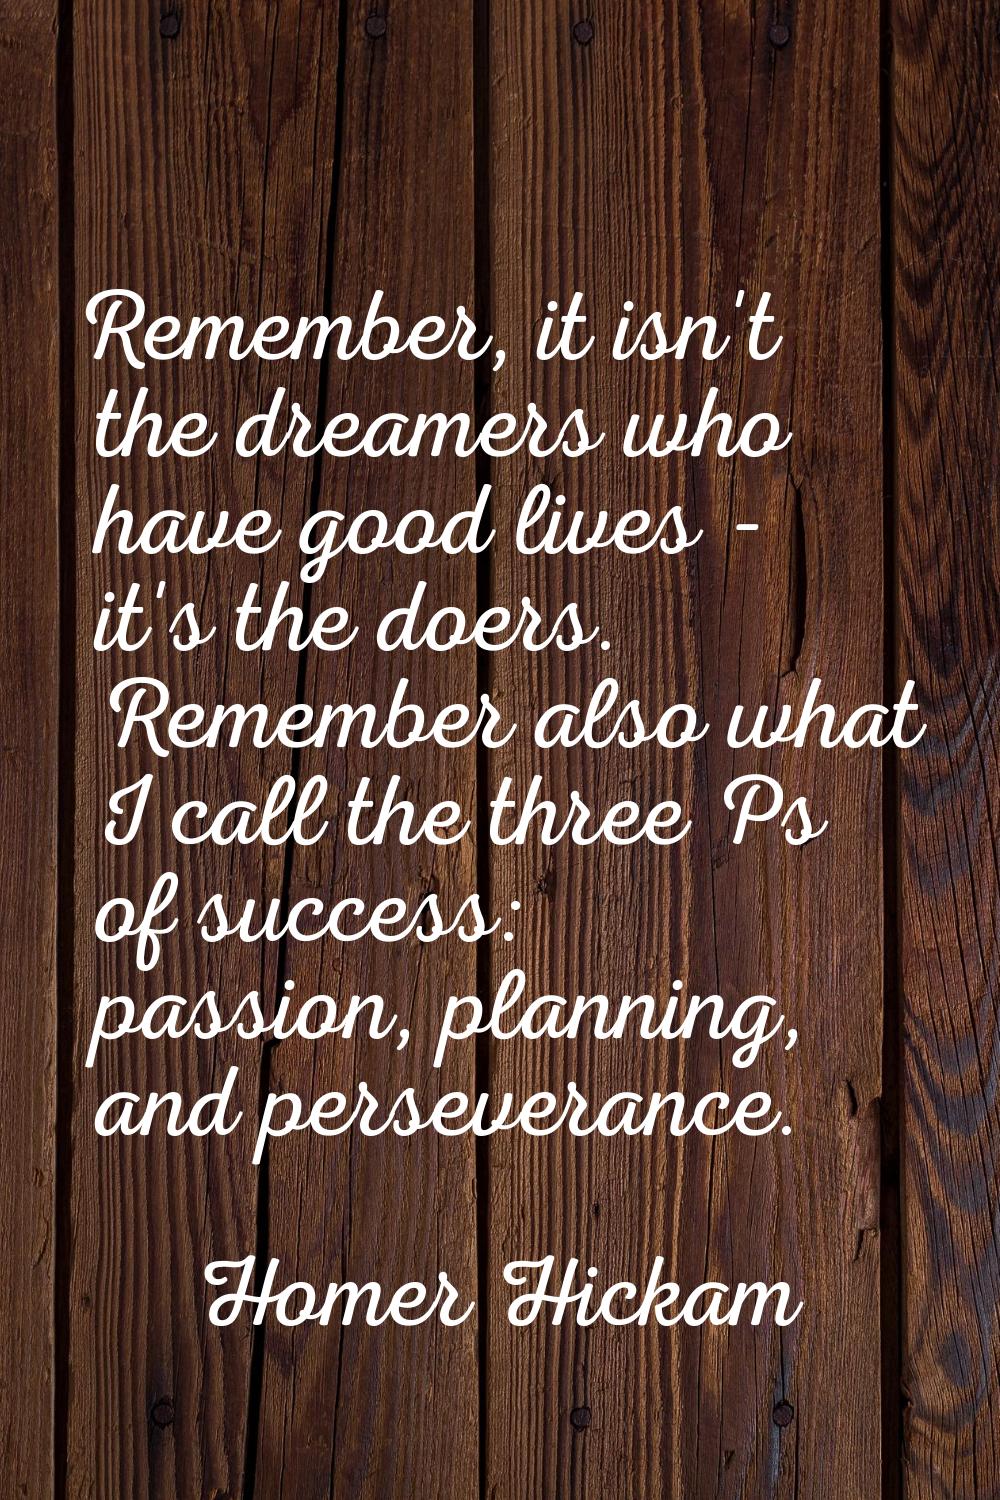 Remember, it isn't the dreamers who have good lives - it's the doers. Remember also what I call the